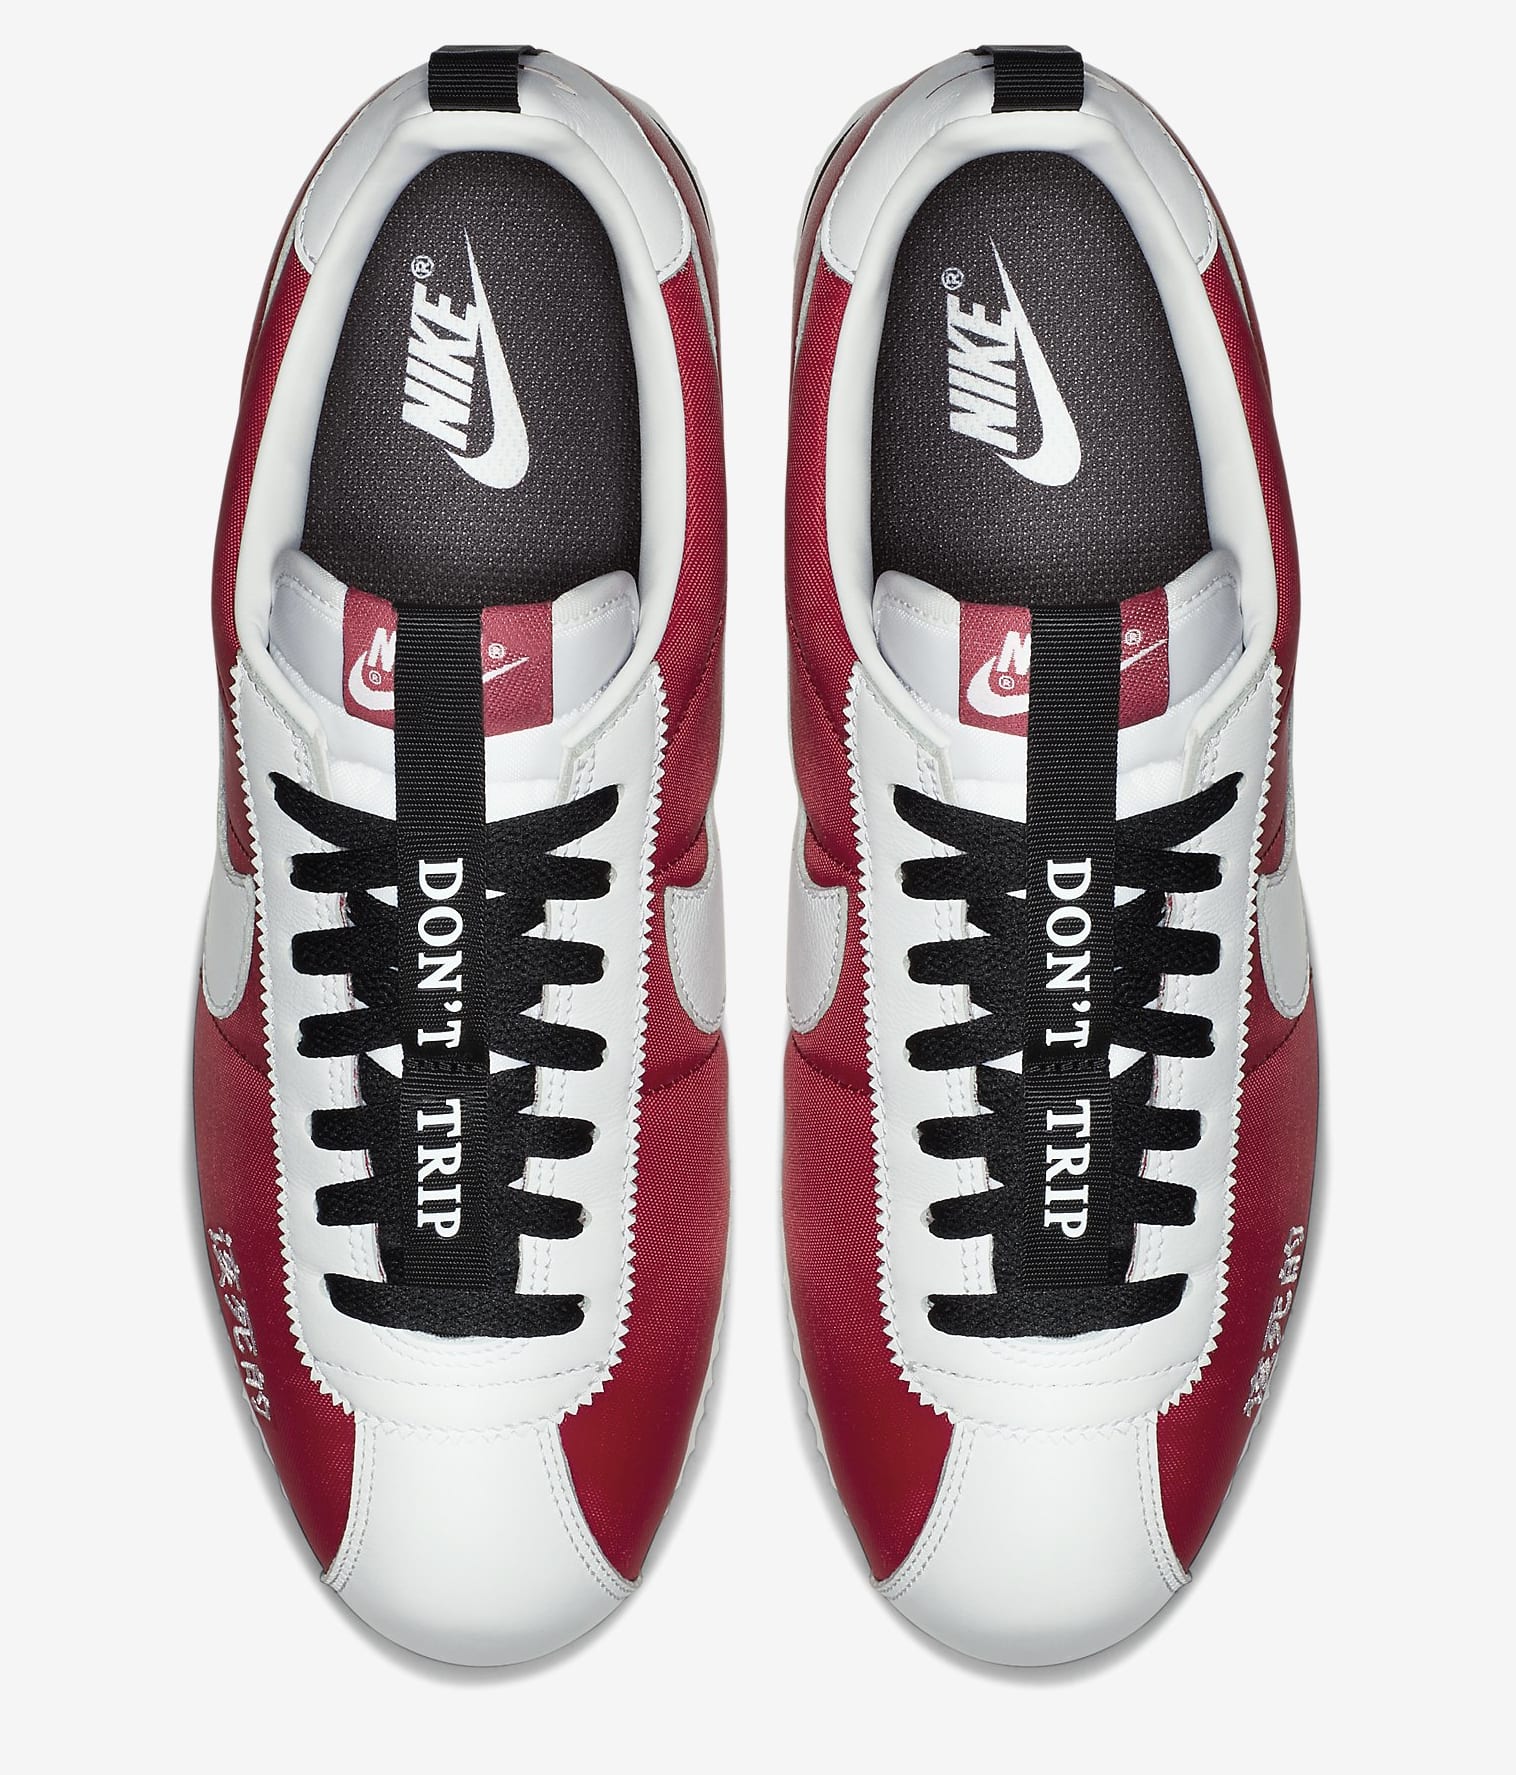 The Nike Cortez 'Kung Fu Kenny' Release Feb. 2018 | Sole Collector